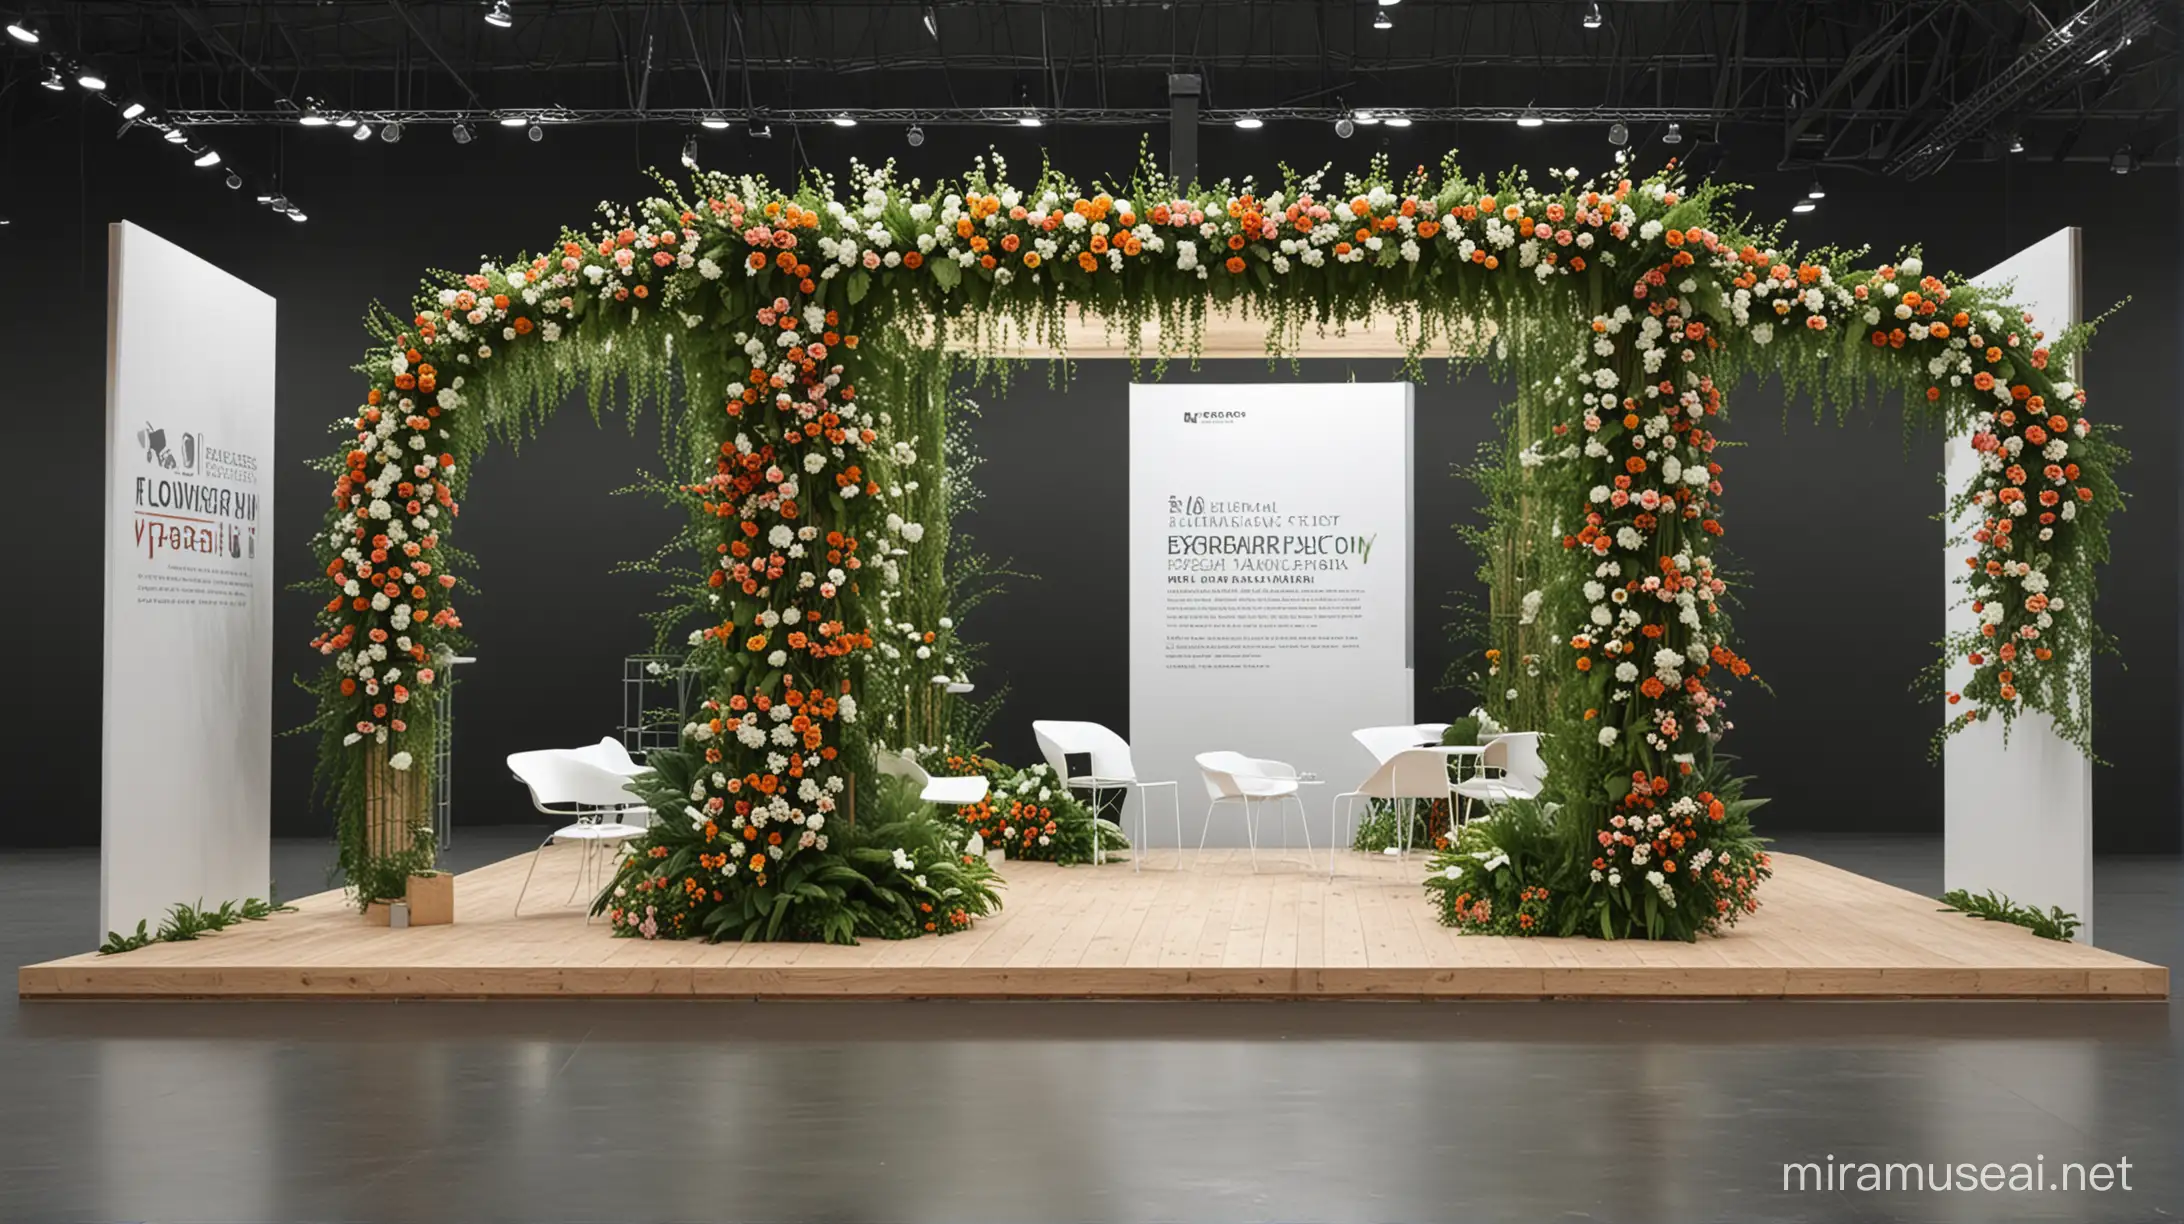 Expo Presentation Vibrant Flowers and Lush Garden Displays